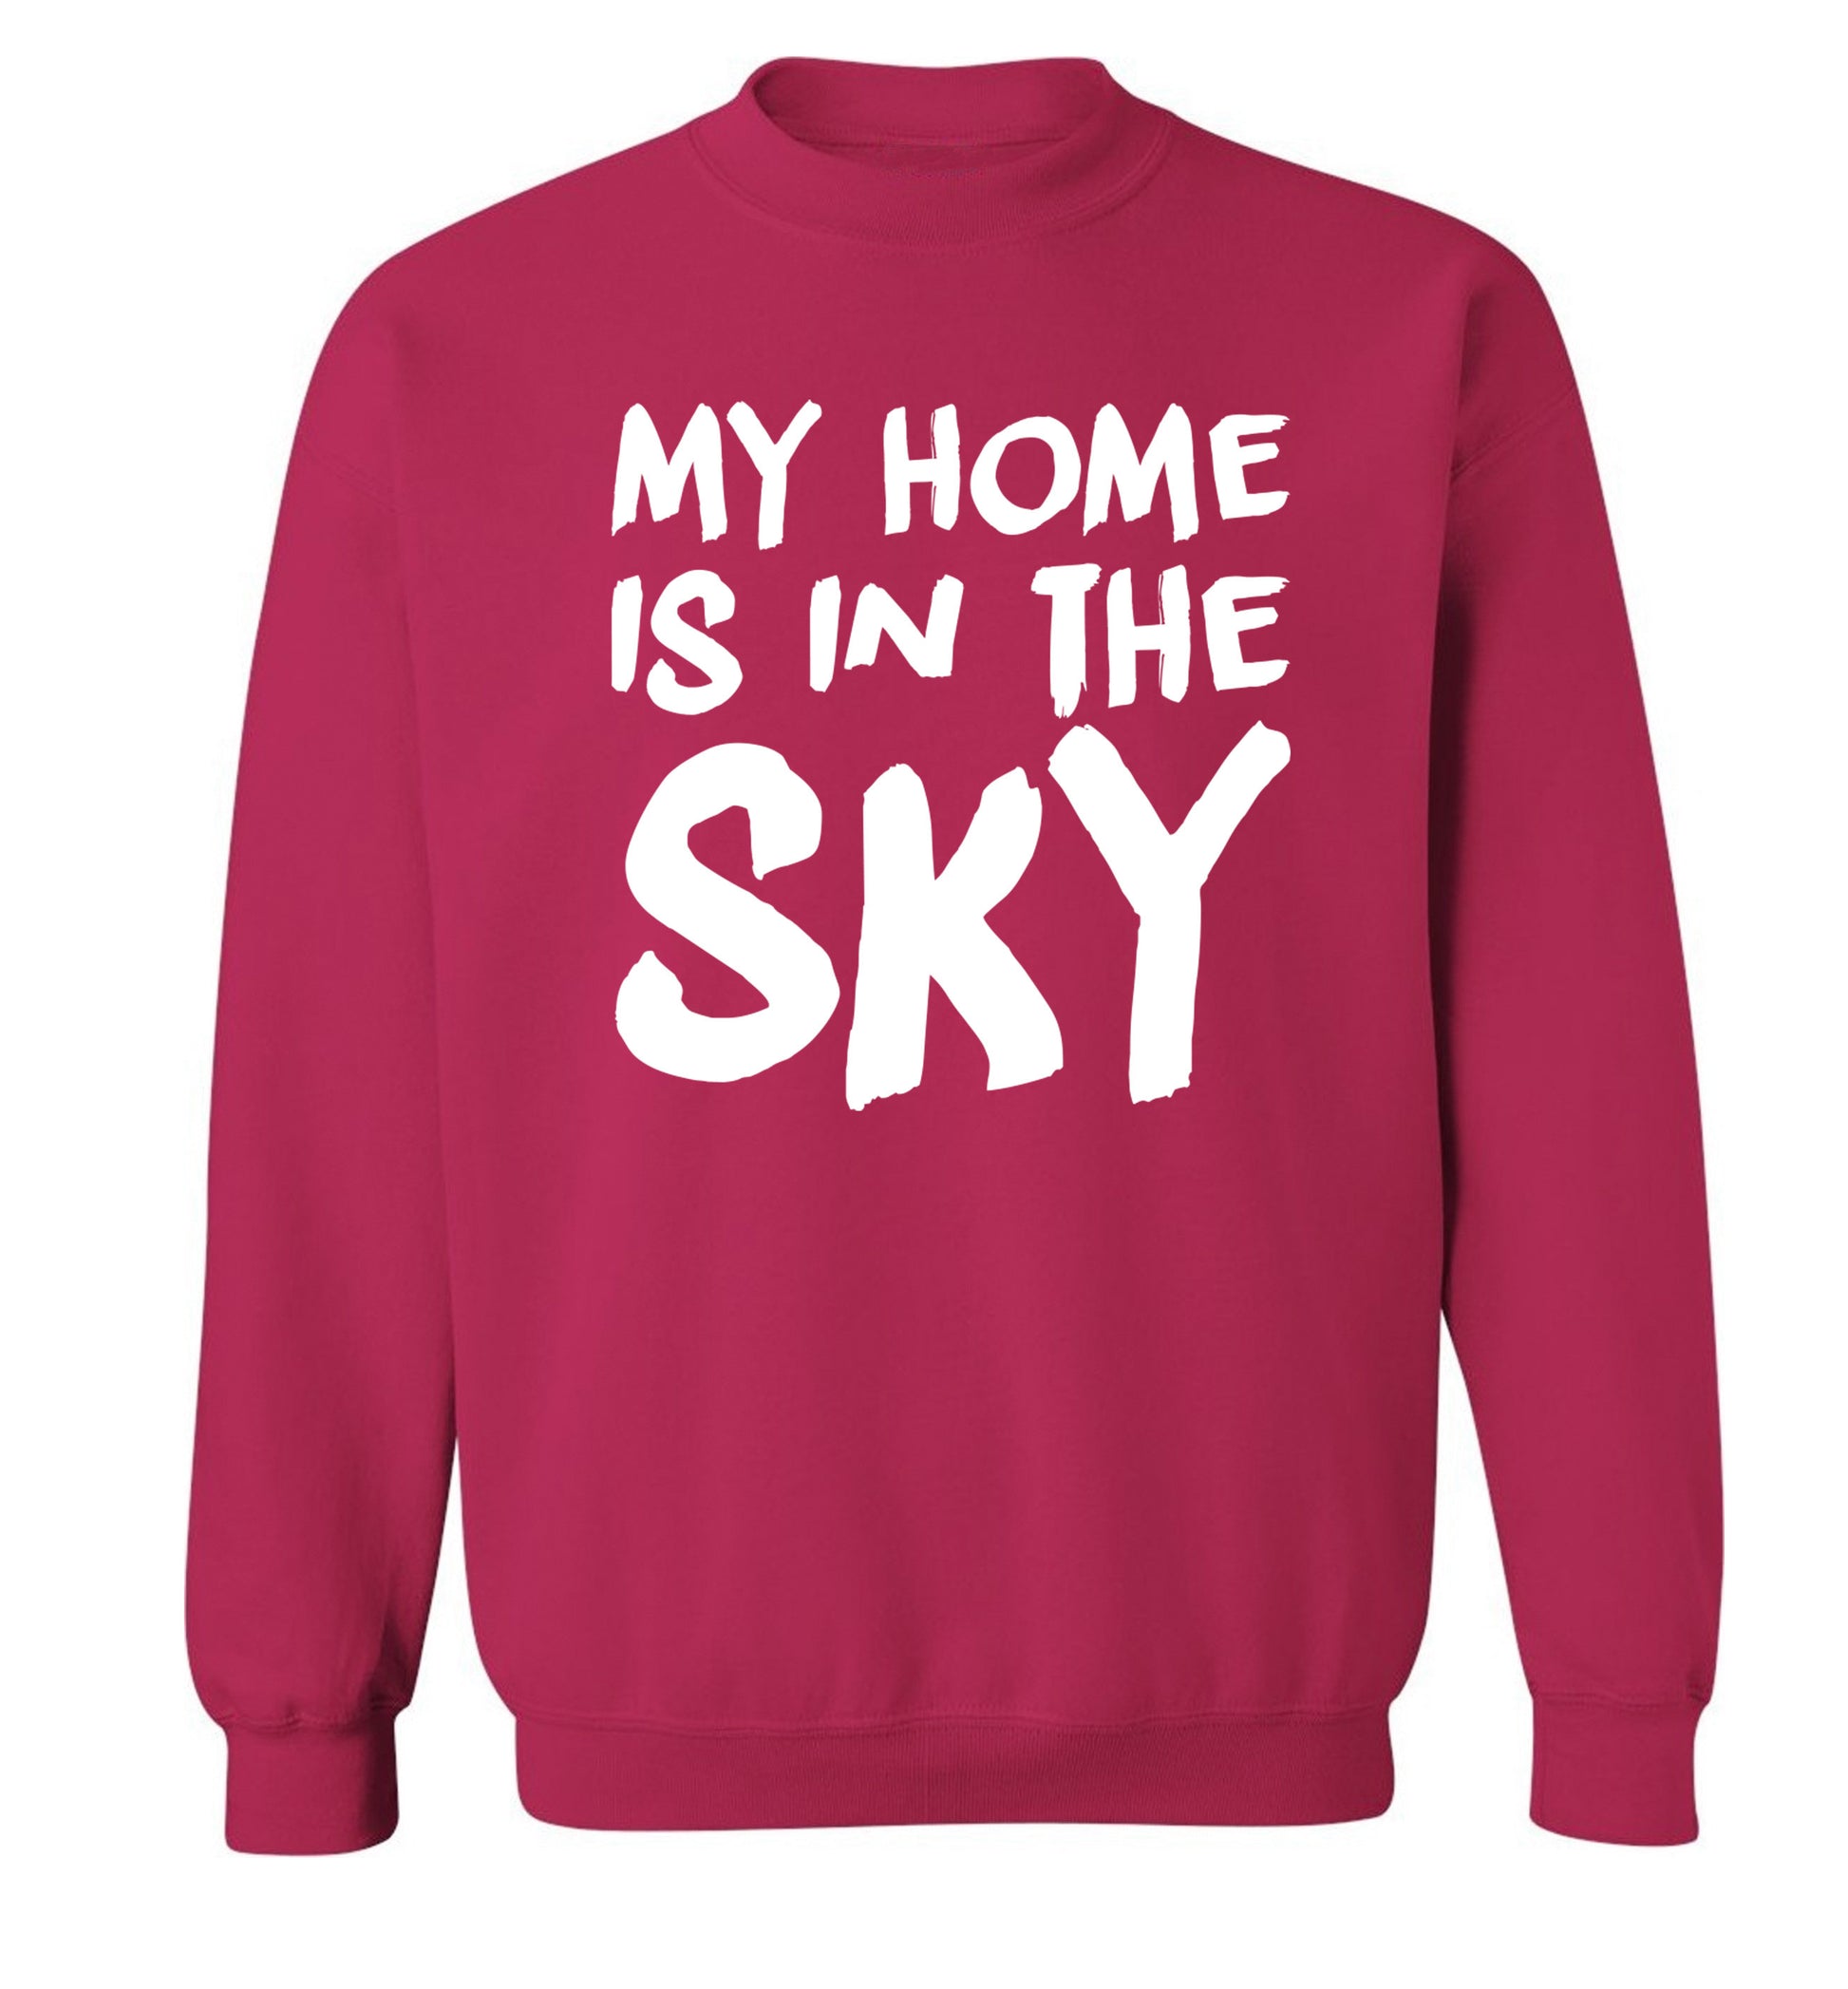 My home is in the sky Adult's unisex pink Sweater 2XL